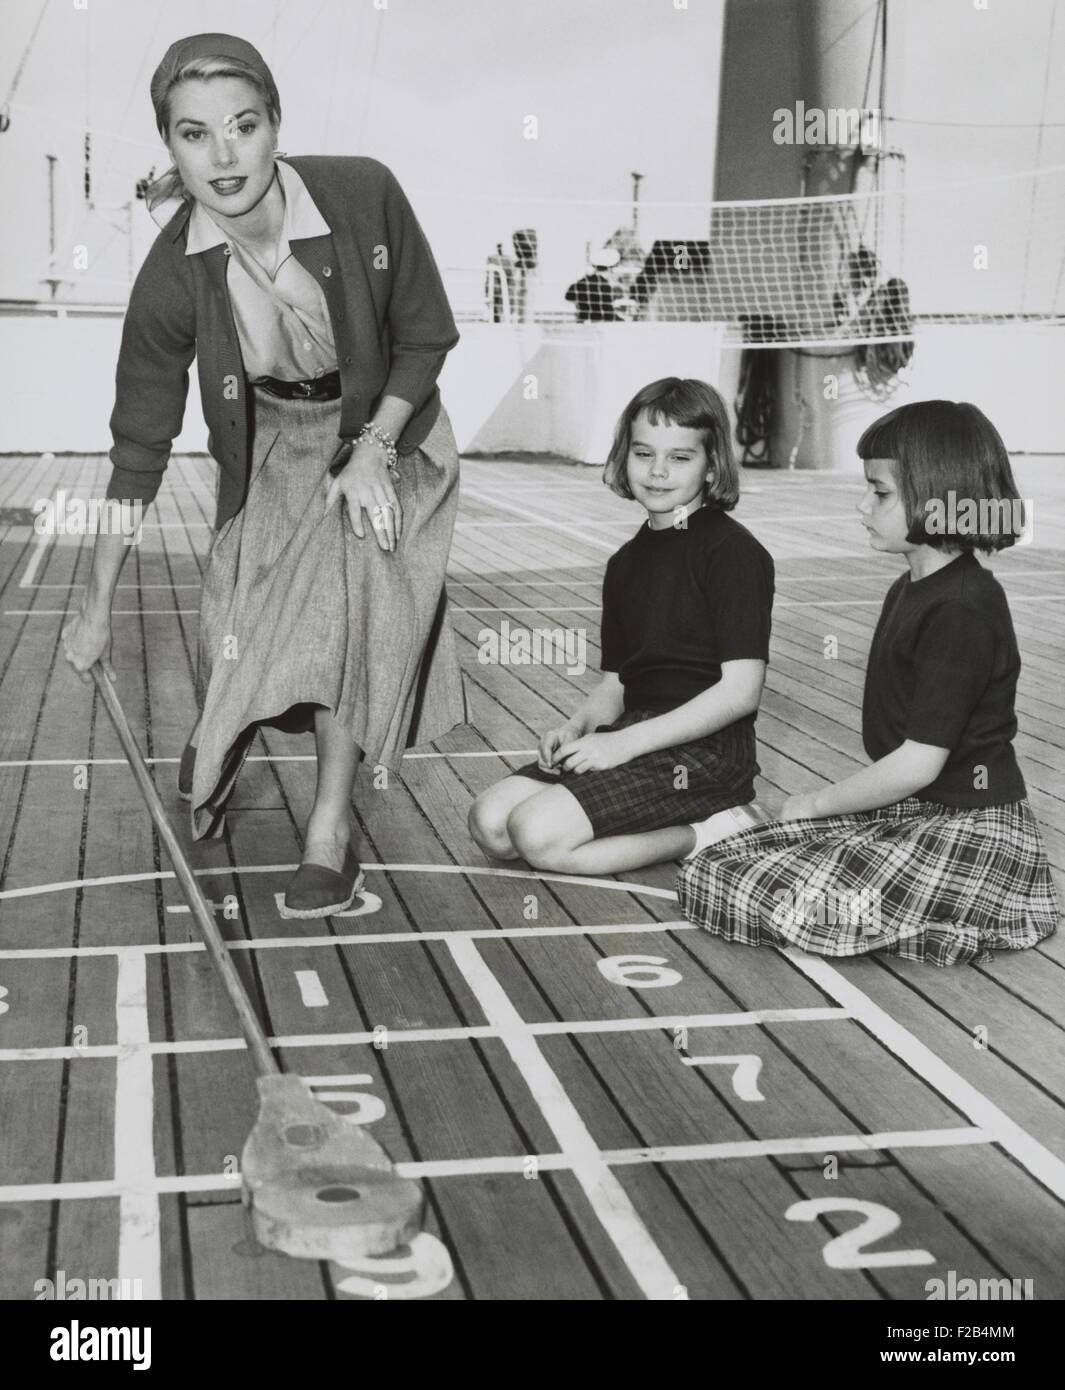 Grace Kelly by playing shuffleboard on the deck of the USS Constitution, April 10, 1956. The ship was stopped at Algeciras, Spain, on it way to Monaco where she married to Prince Rainier III on April 18th. With her are her nieces, Margaret and Mary Lee Davis. - (BSLOC 2015 1 19) Stock Photo